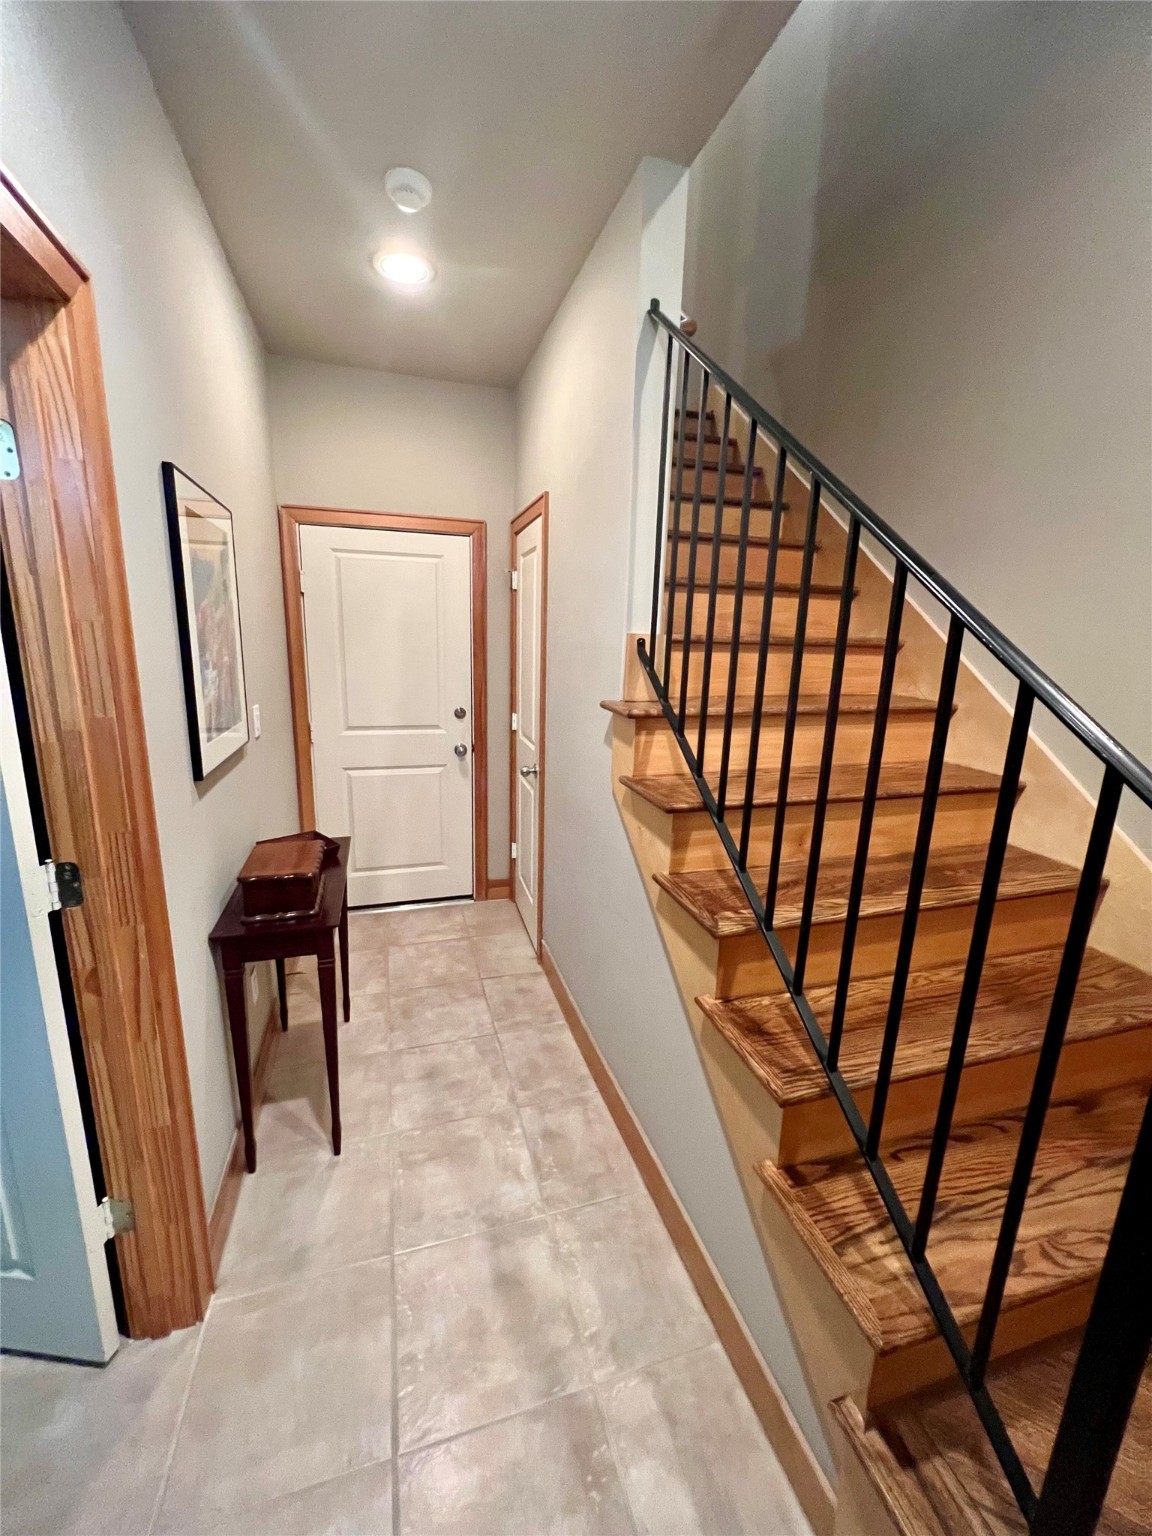 Entrance to home, tile flooring and hardwood staircase, attached 2 car garage, first floor private bedroom suite with bathroom and closet.